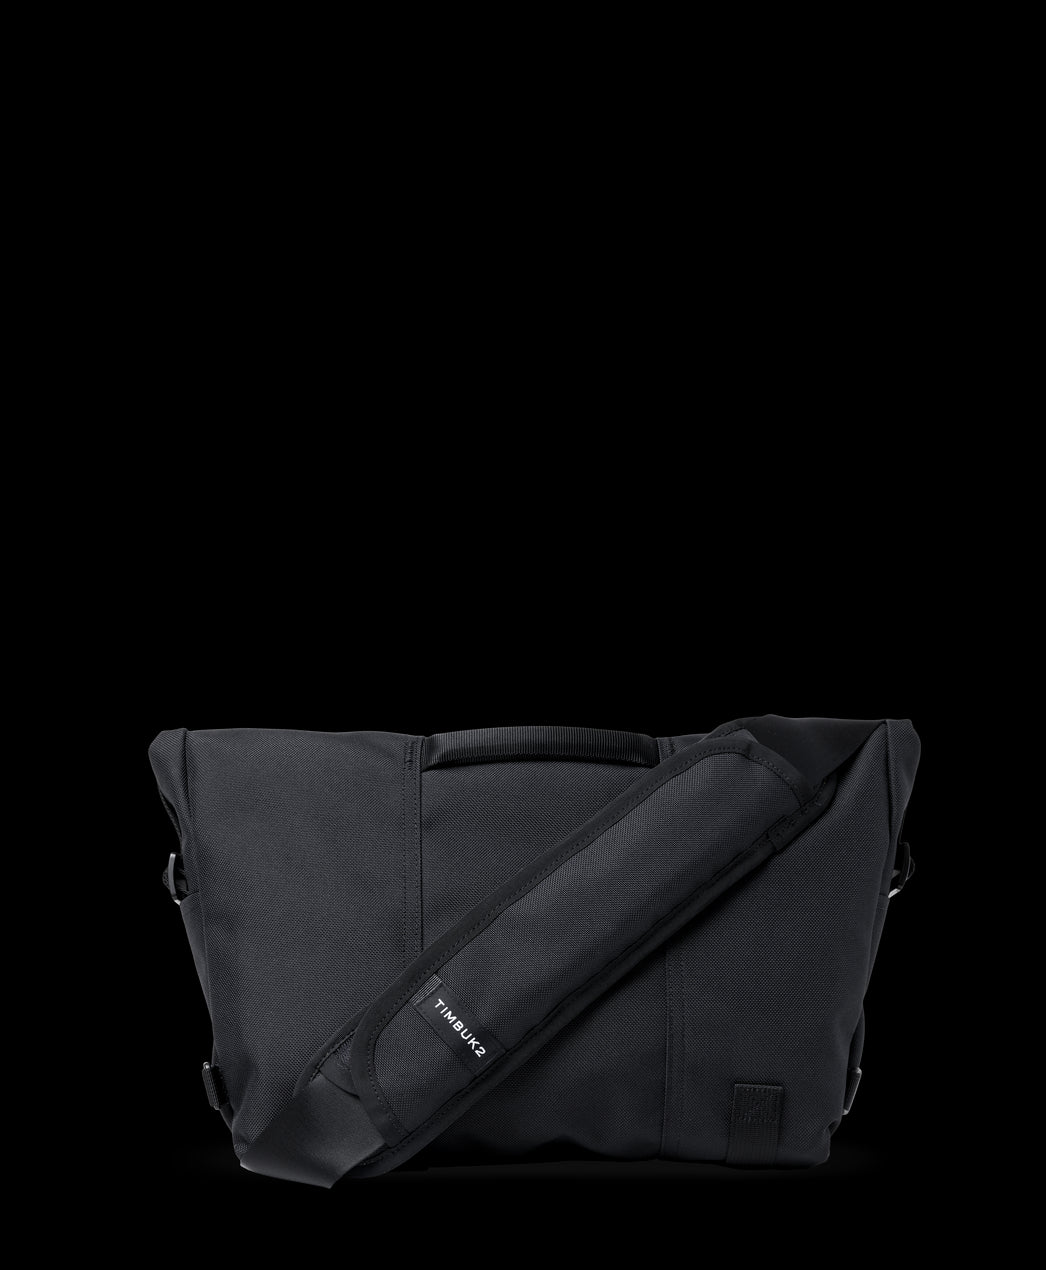 Timbuk2 Classic Messenger Bag - general for sale - by owner